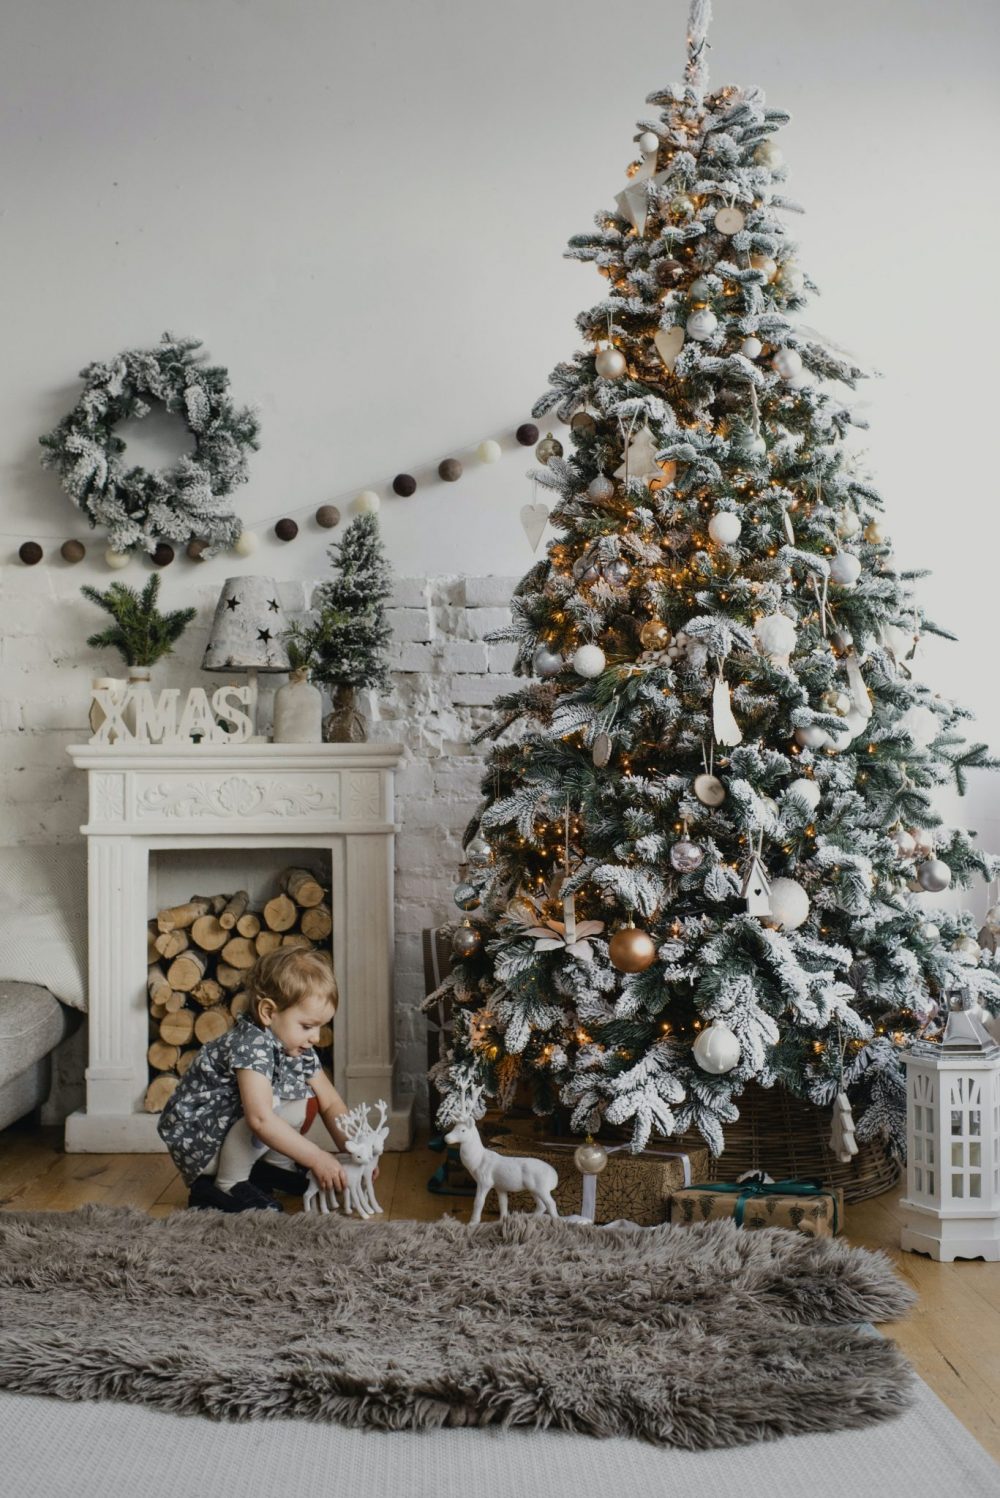 4 Unique Christmas Trees for Holiday Inspiration!